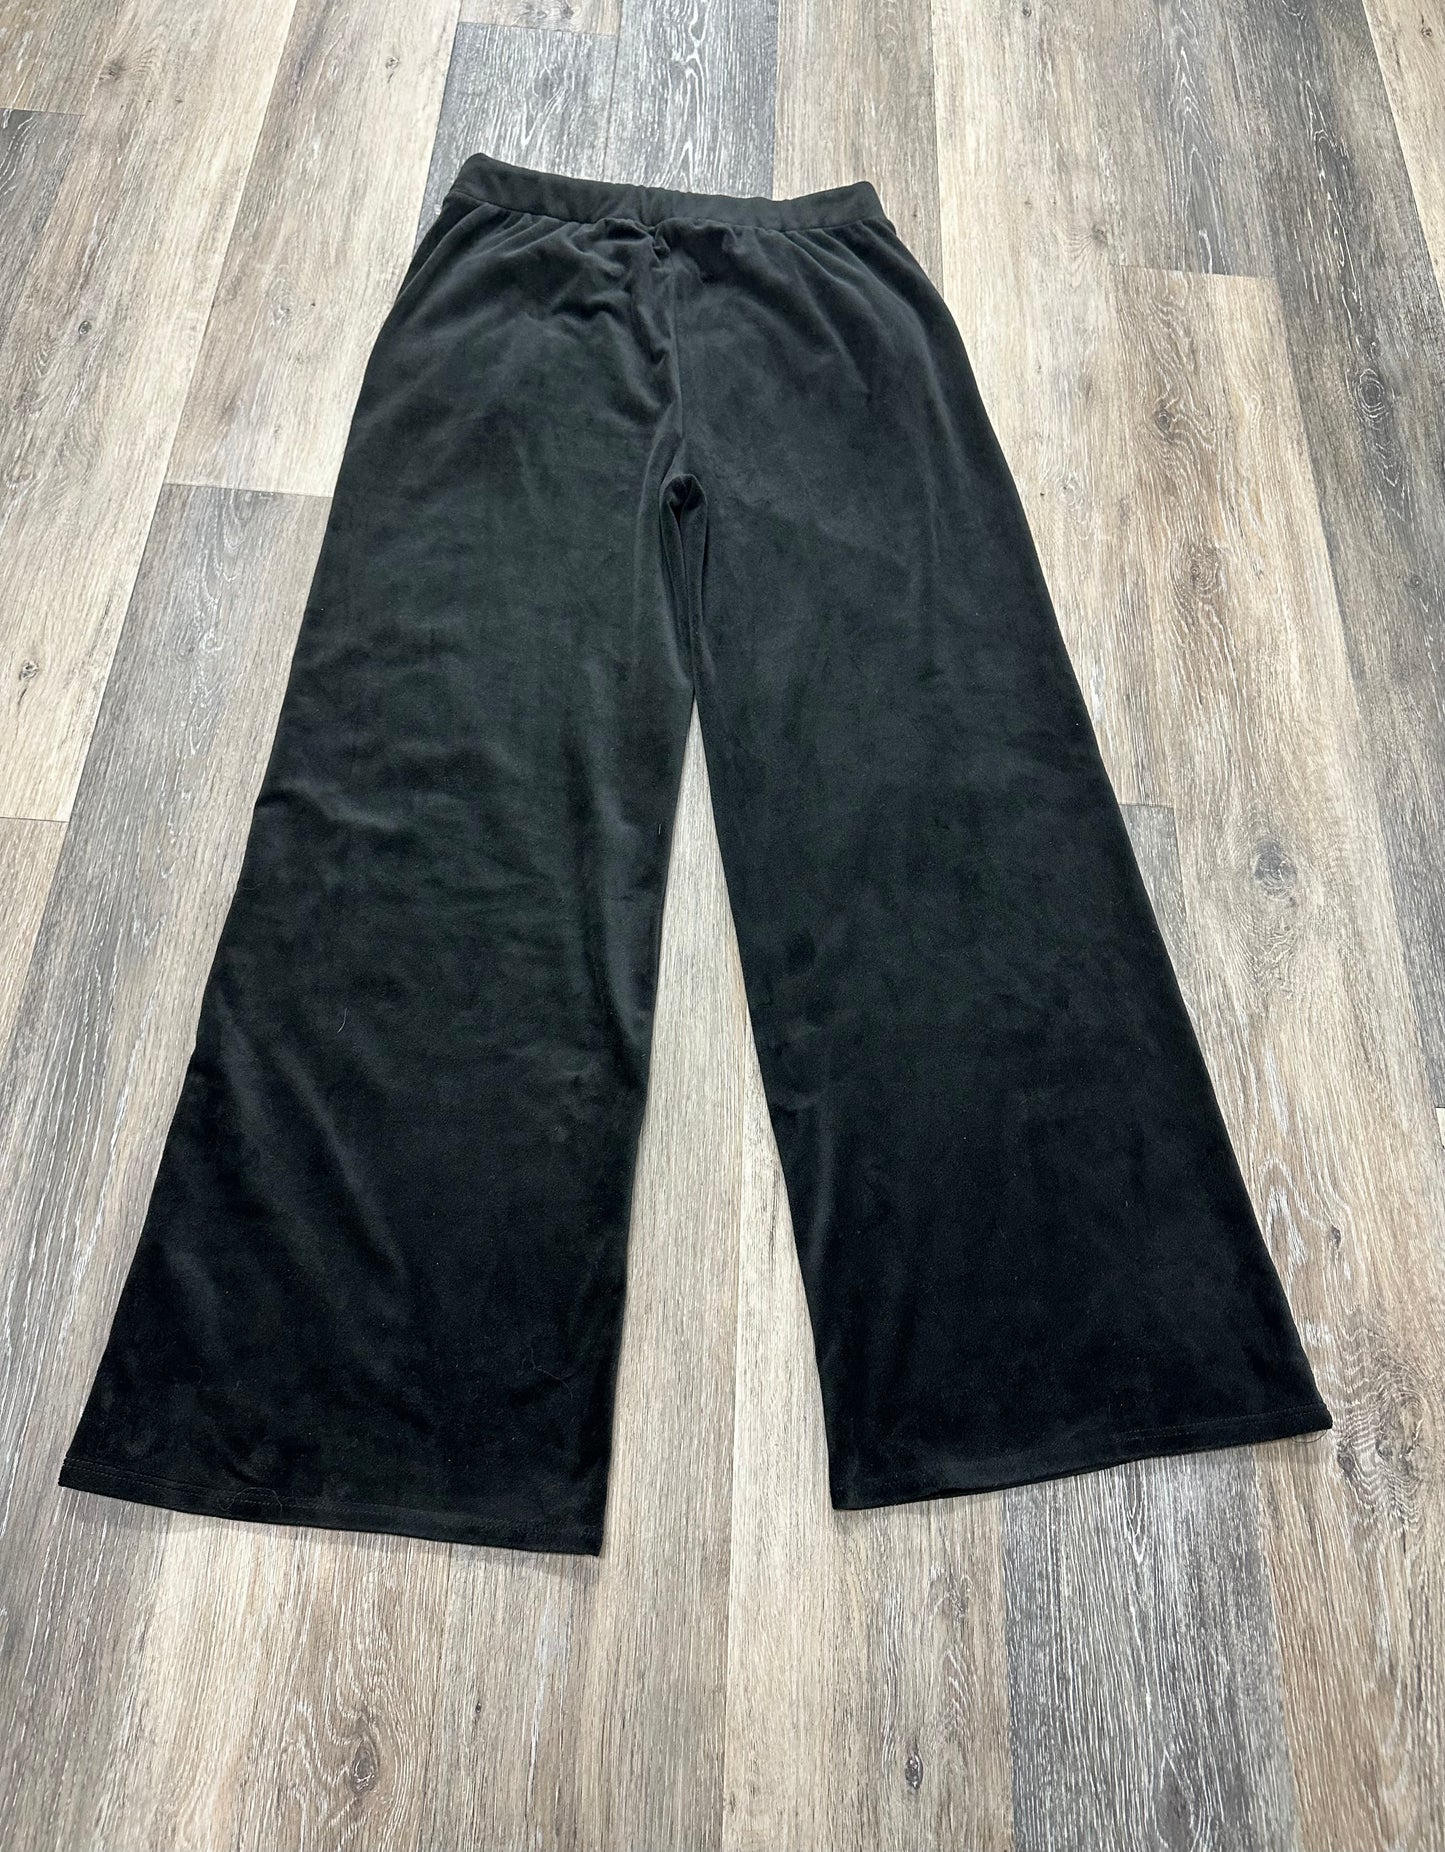 Athletic Pants By Beyond Yoga  Size: M